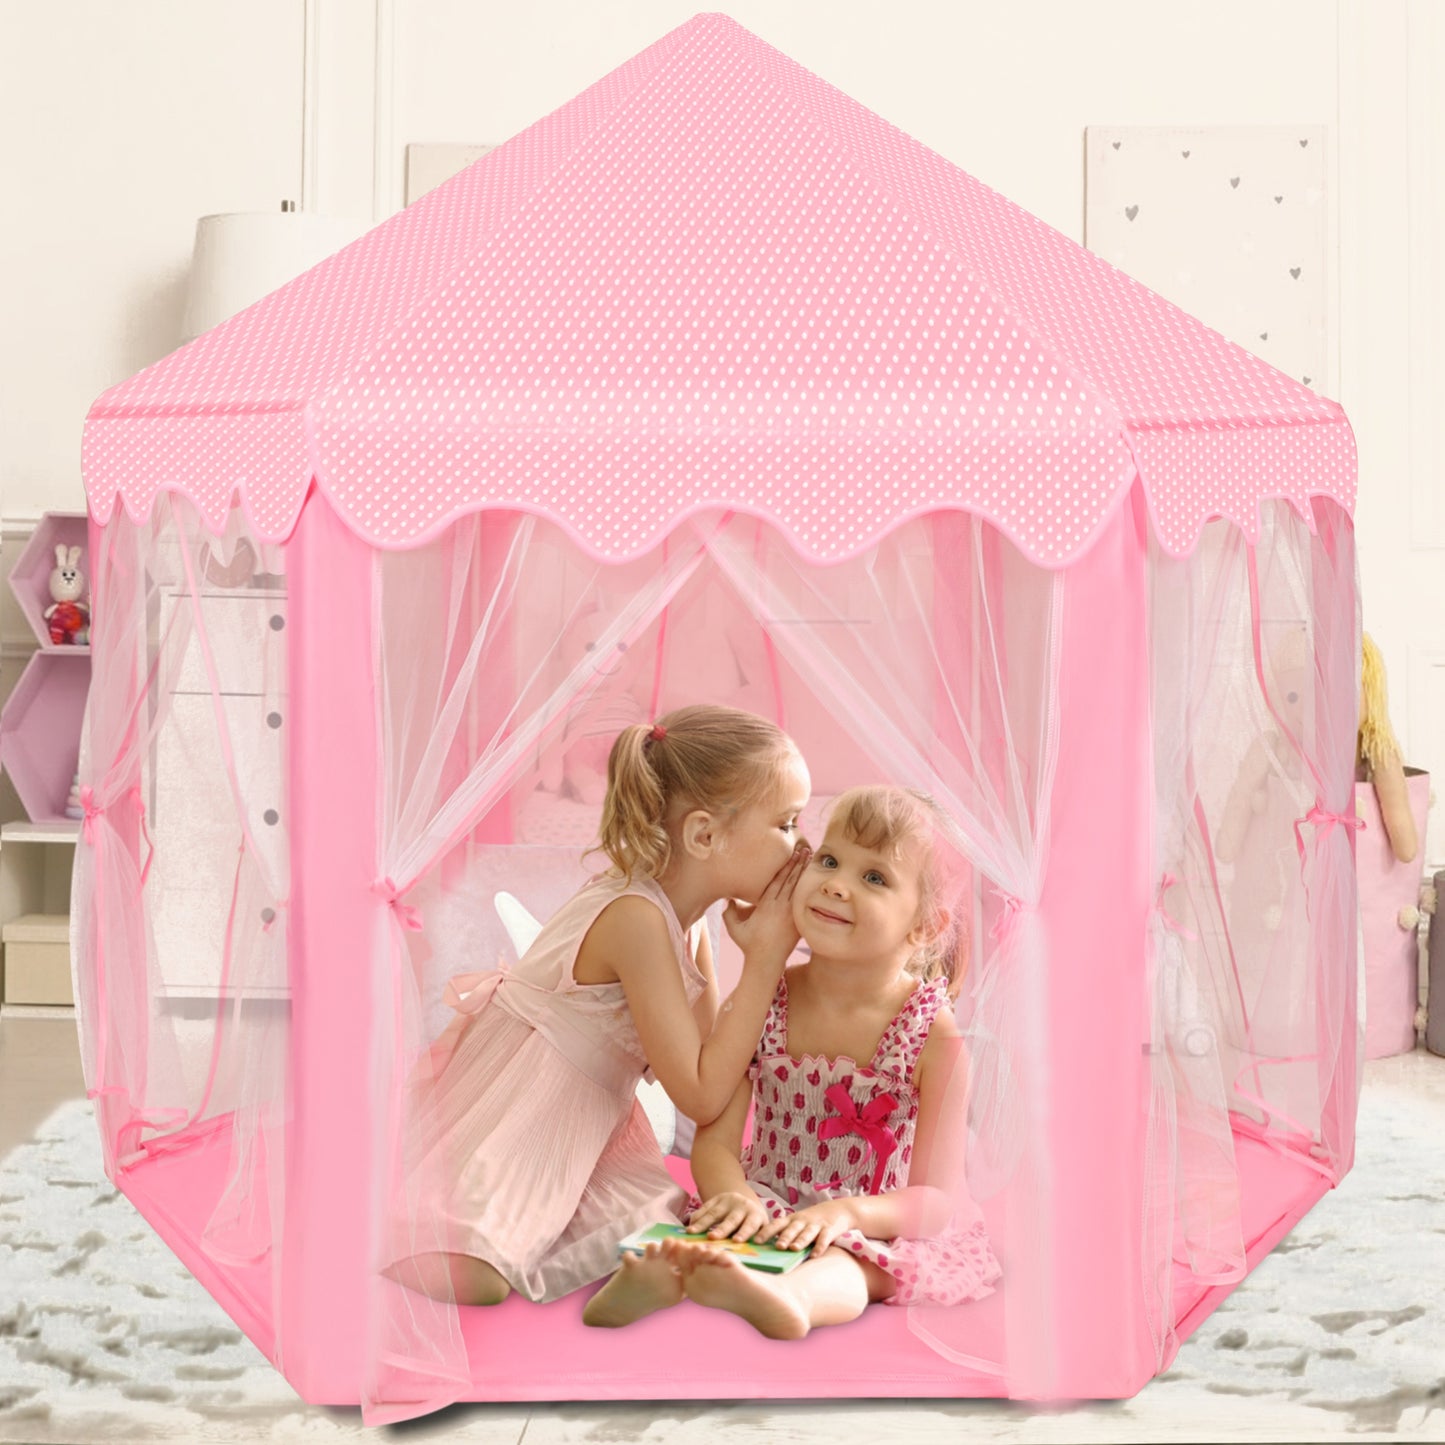 Wisairt Princess Castle Tent for Girls, Large Kids Playhouse with Star Lights for kids Toddlers Indoor Outdoor Toys (Pink)